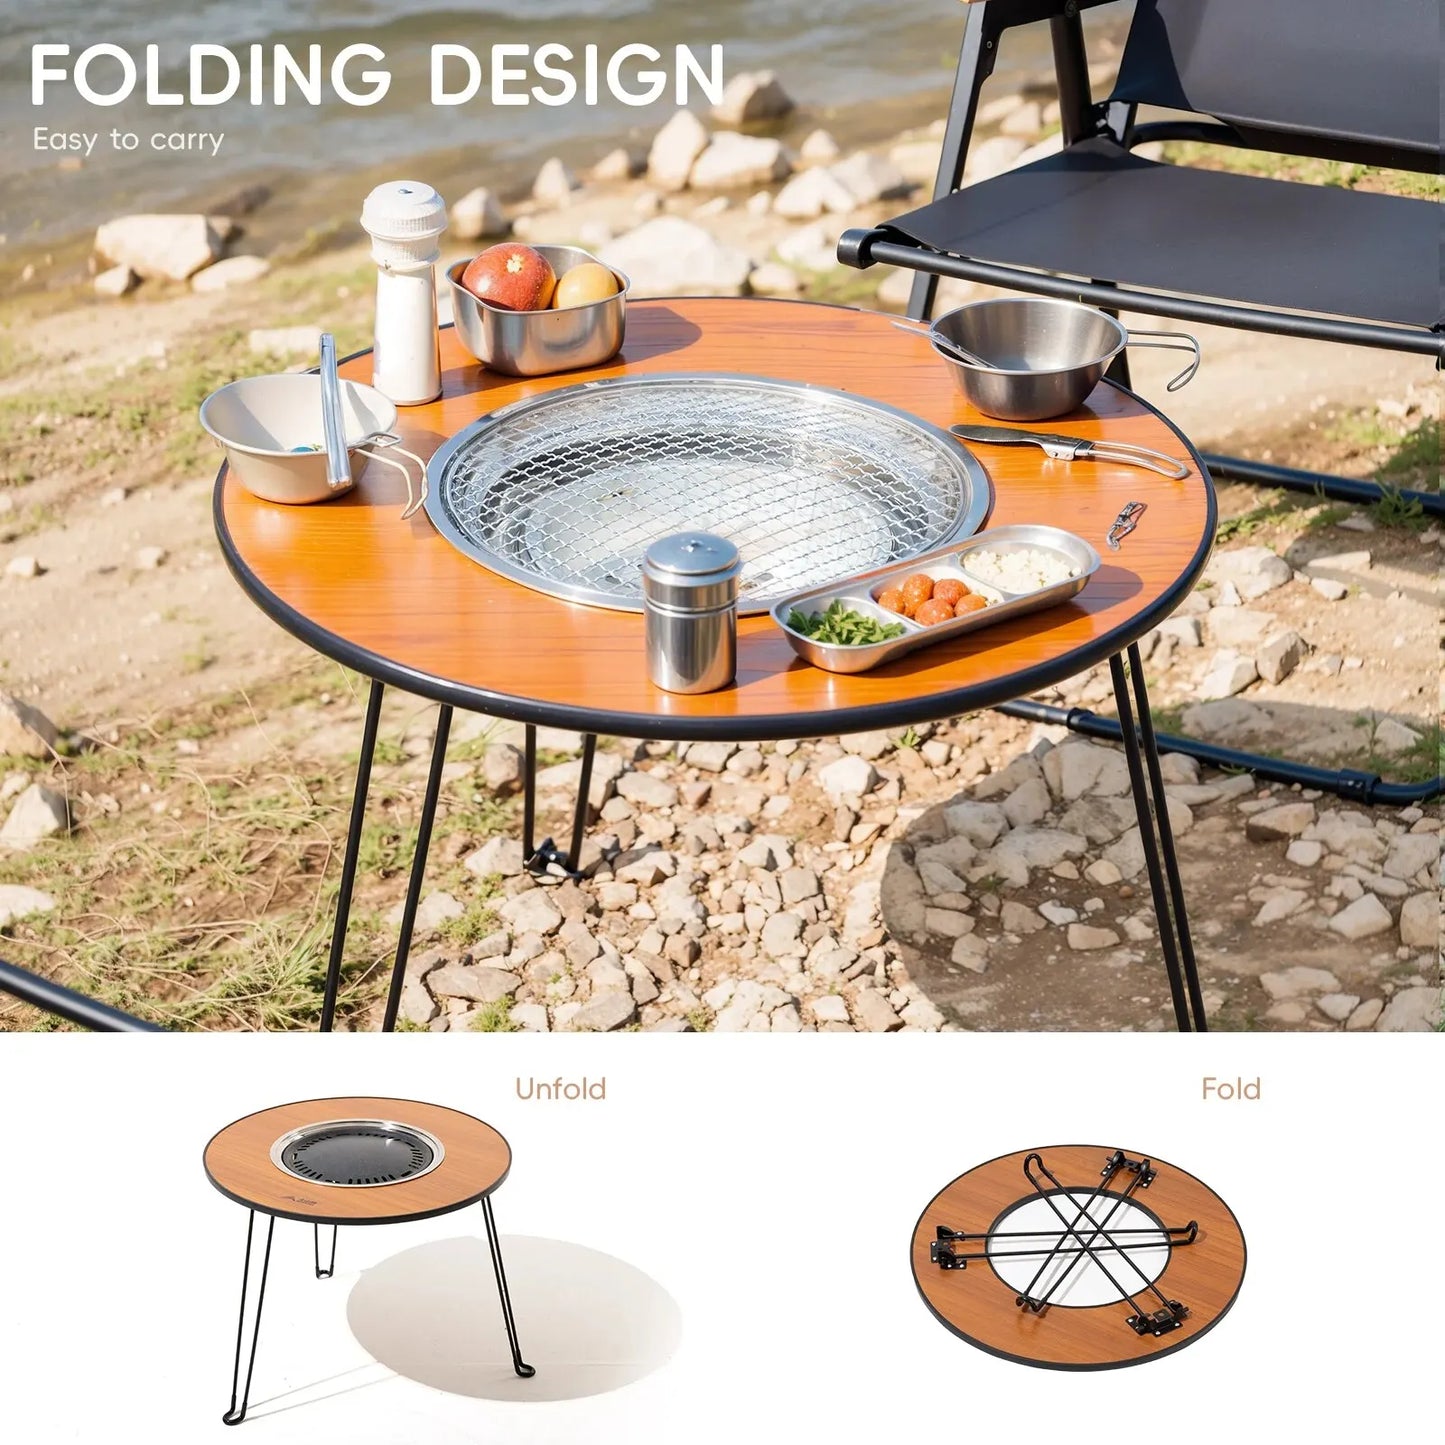 BISINNA Folding Barbecue Round Table Stove Portable Camping BBQ